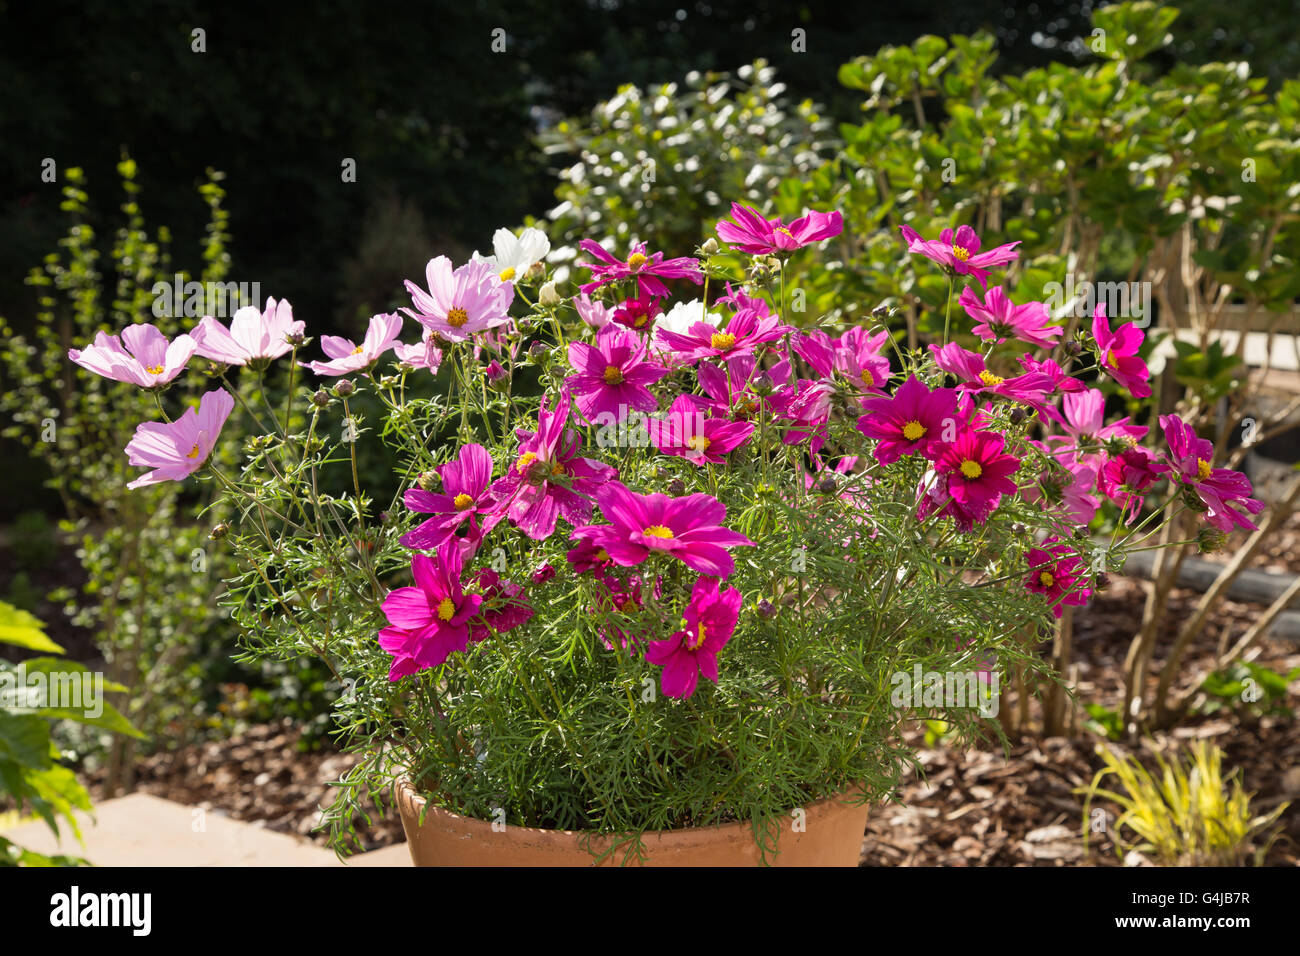 Cosmos flowers growing in a garden pot Stock Photo - Alamy